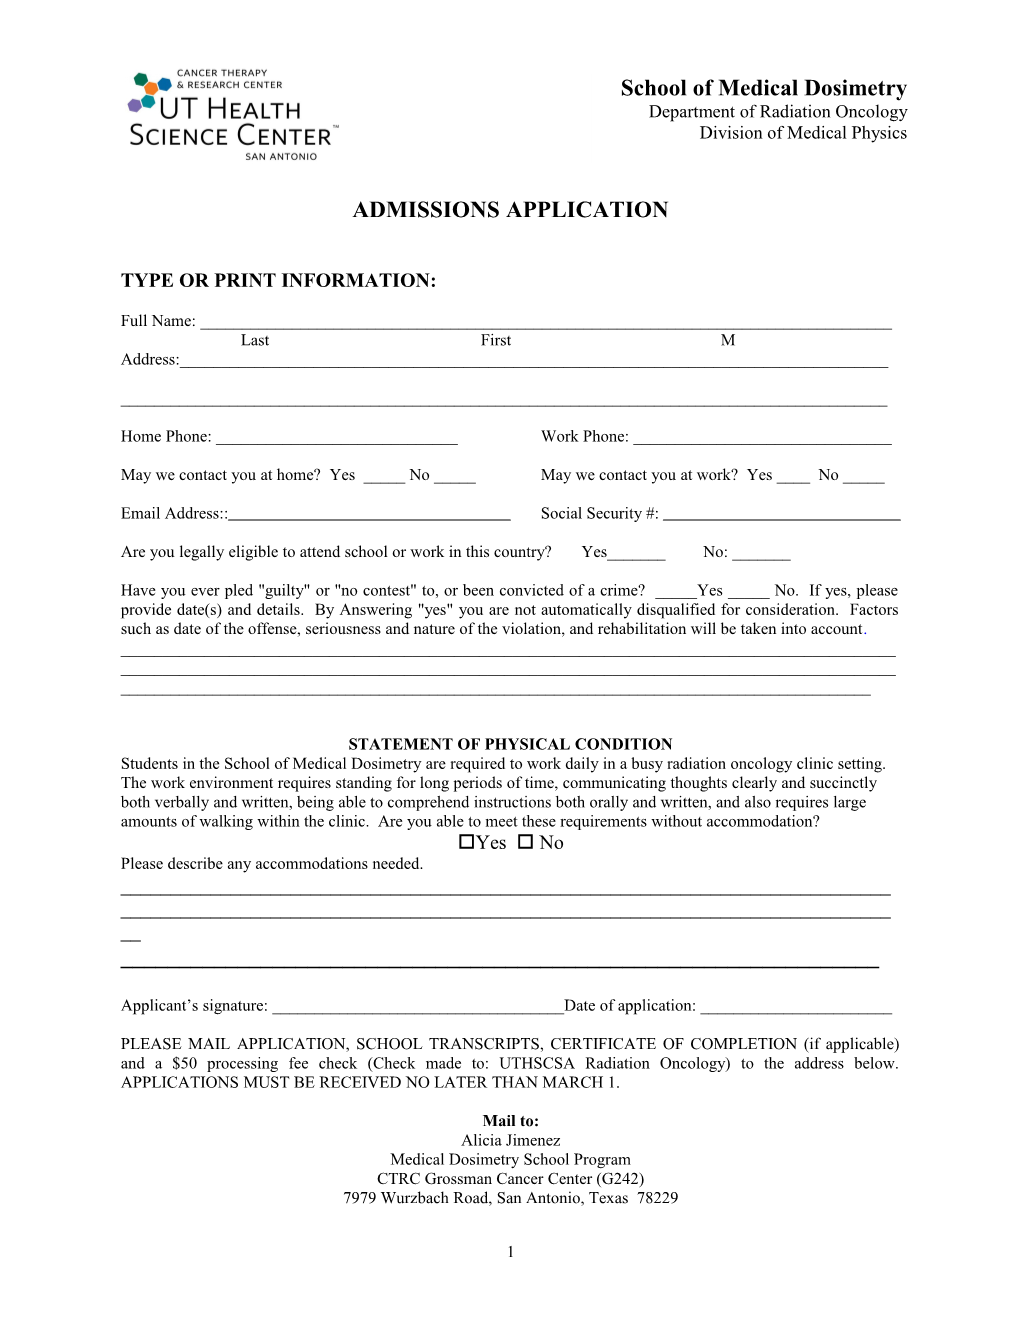 Admissions Application For